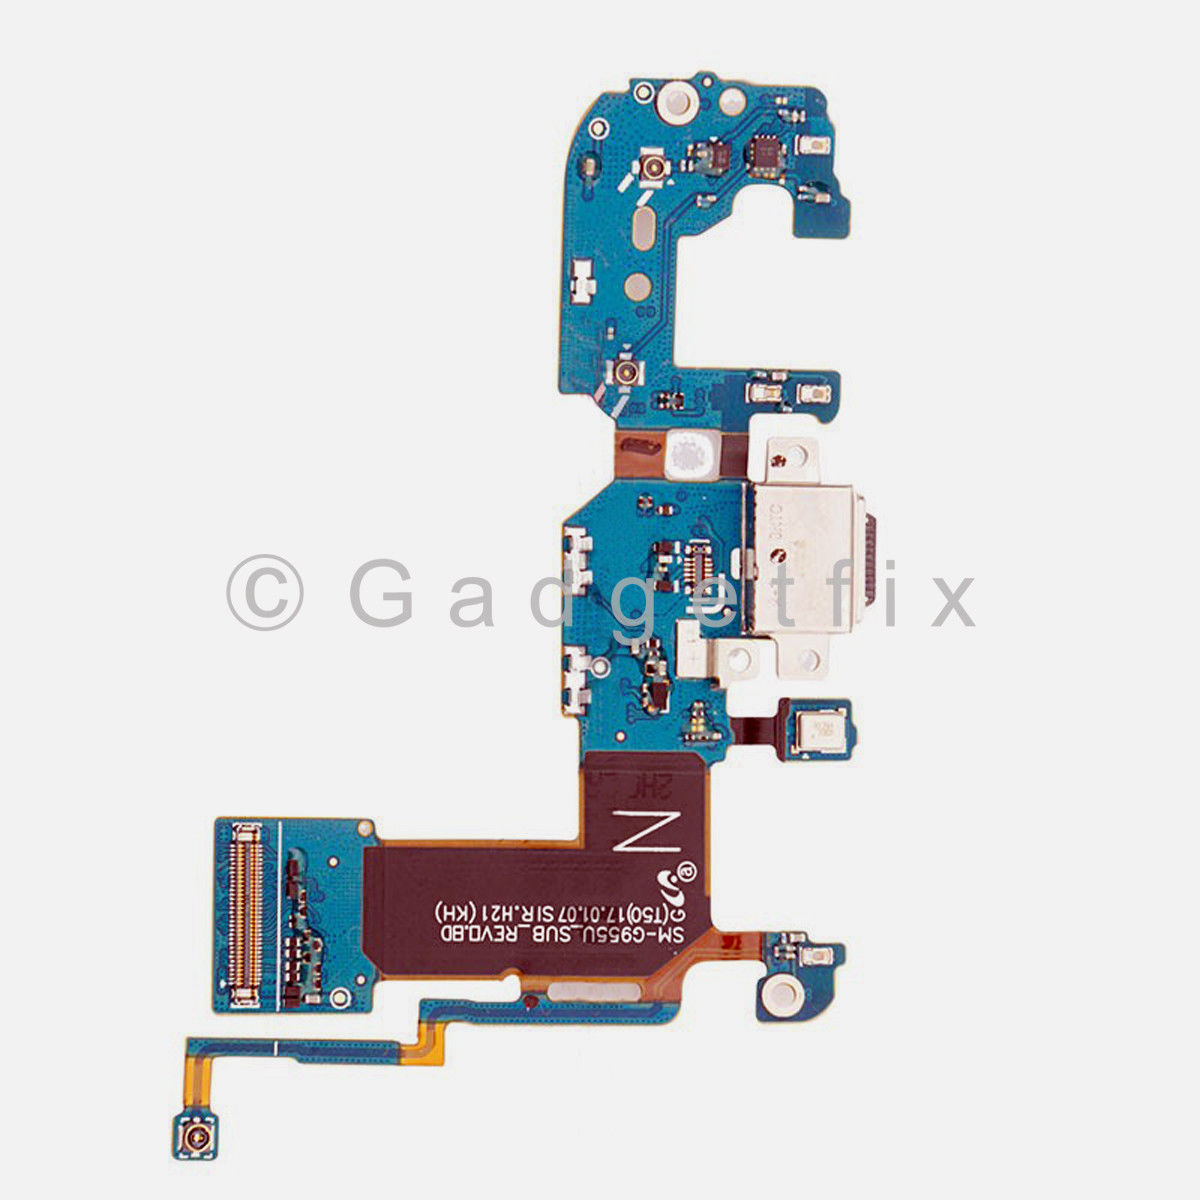 USB Charger Charging Port Dock Mic Flex Cable For Samsung Galaxy S8 Plus